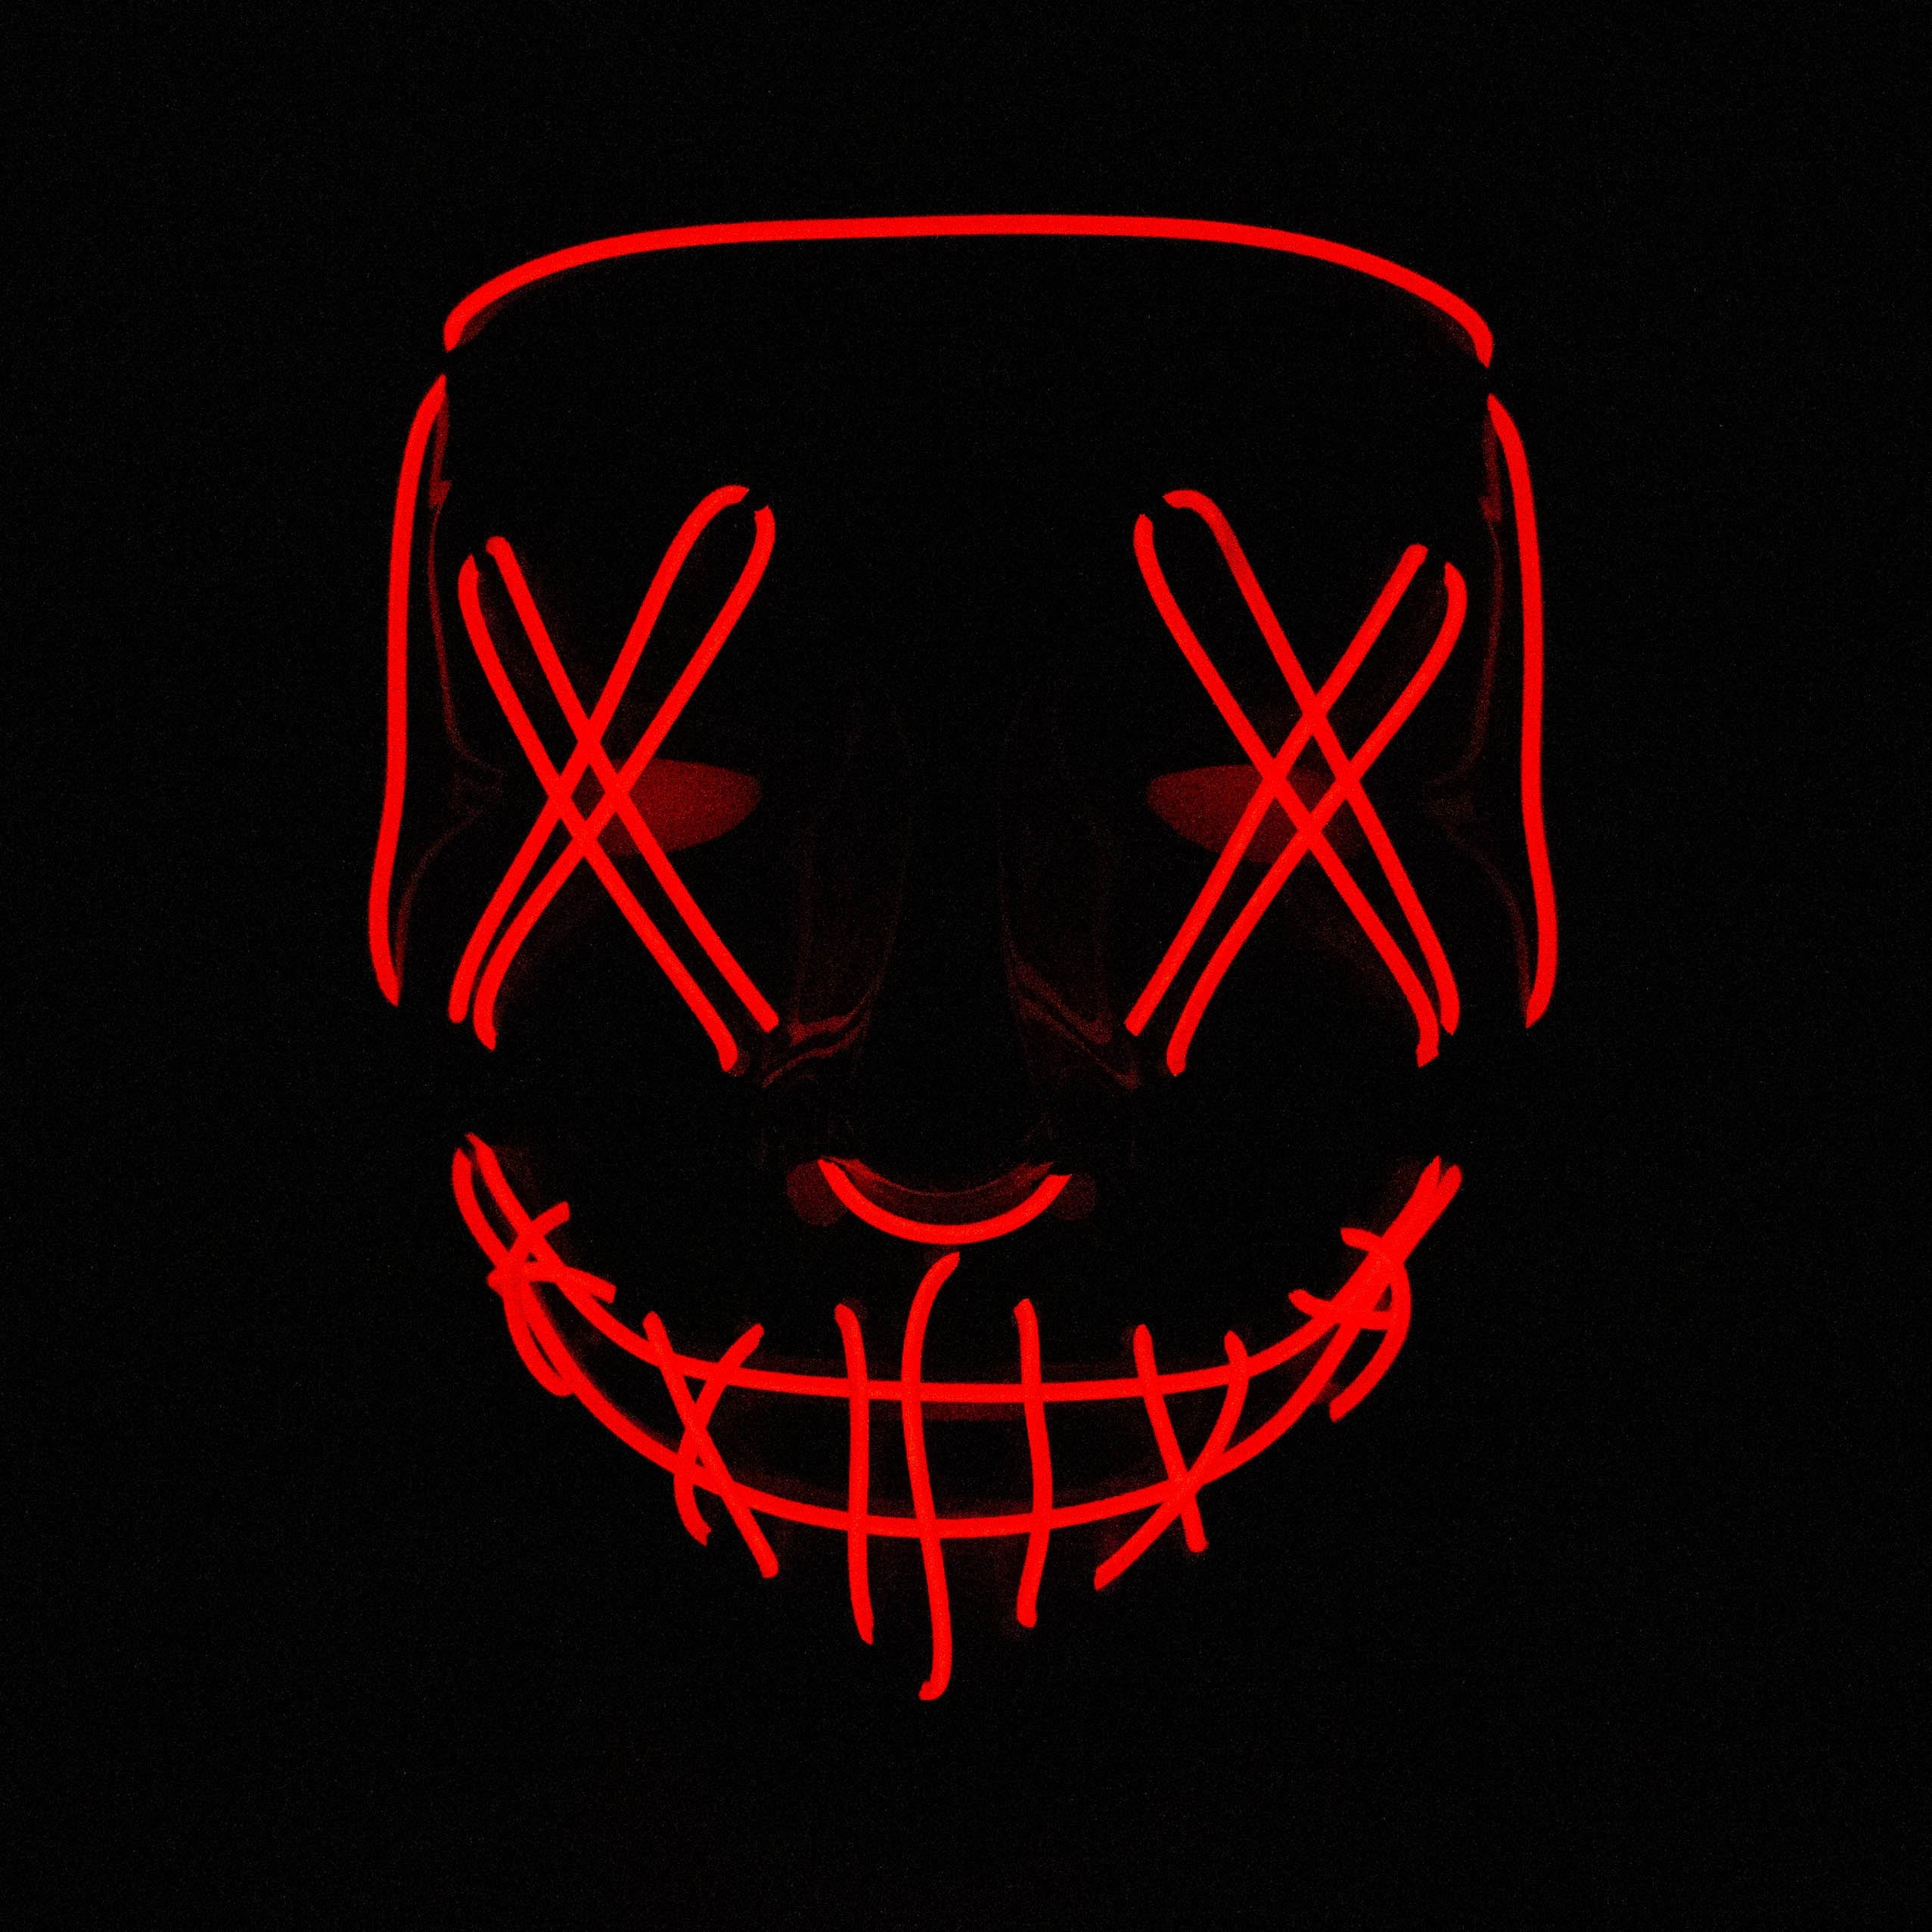 LED Neon Mask for party or Halloween Costume_1